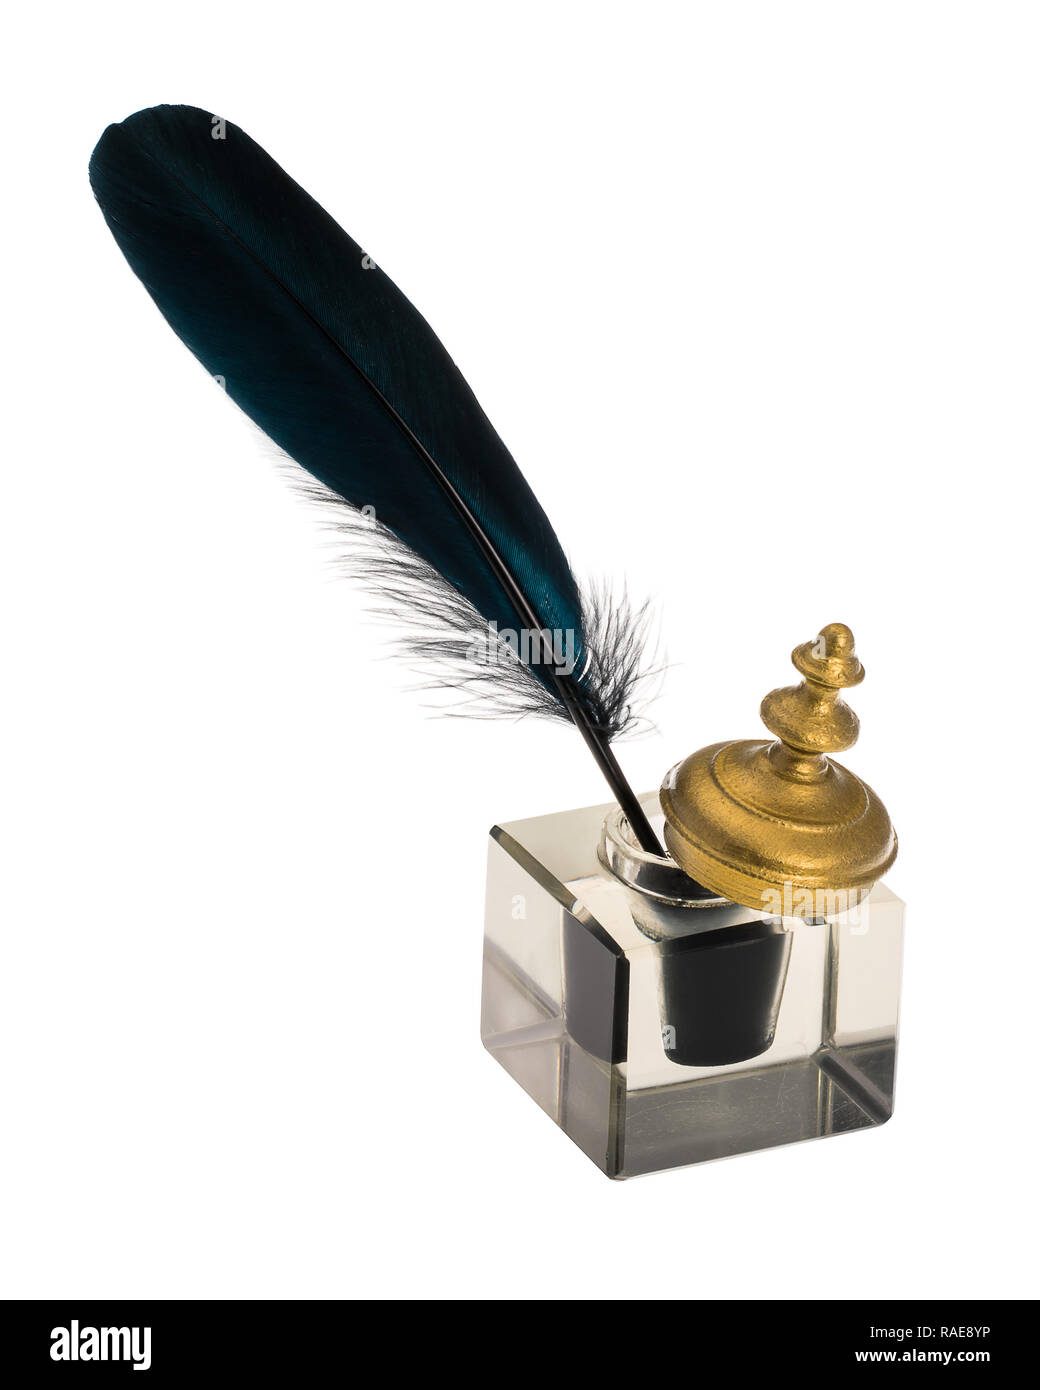 Antique inkpot with gold cap and black feather isolated on white background Stock Photo